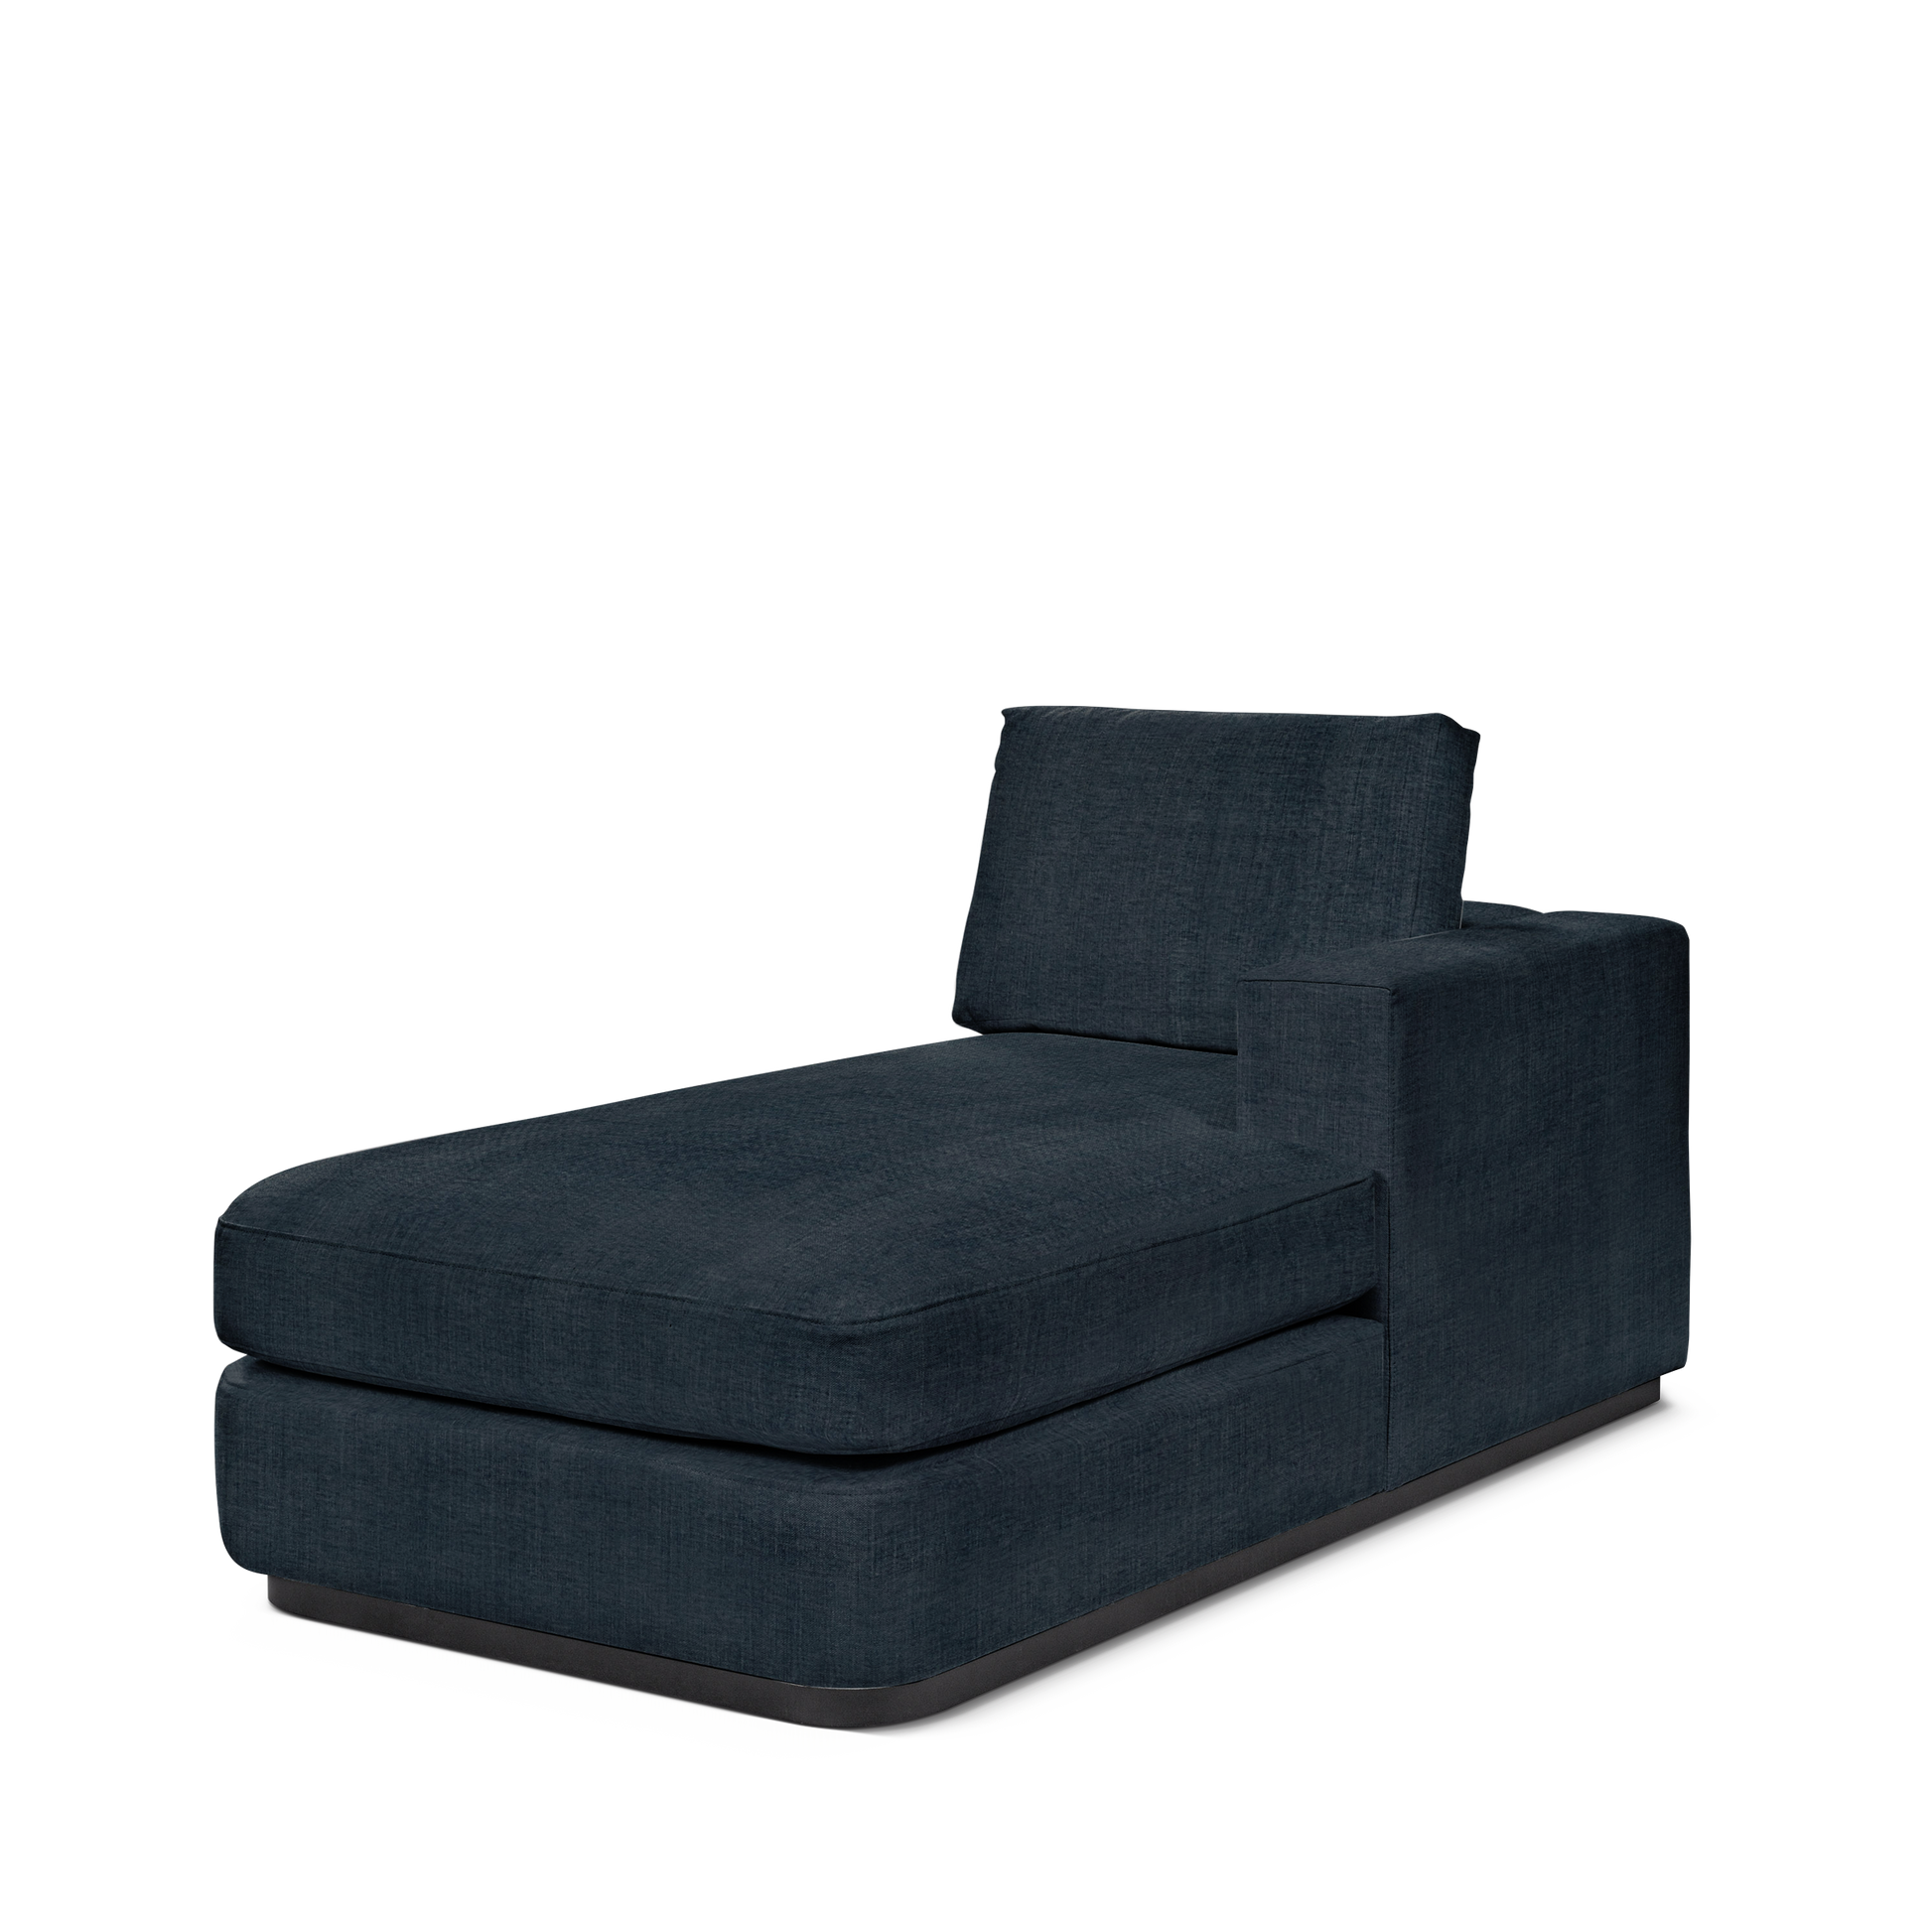 ATLAS 90 Lounge Bed arm rest right with linco dark blue textile